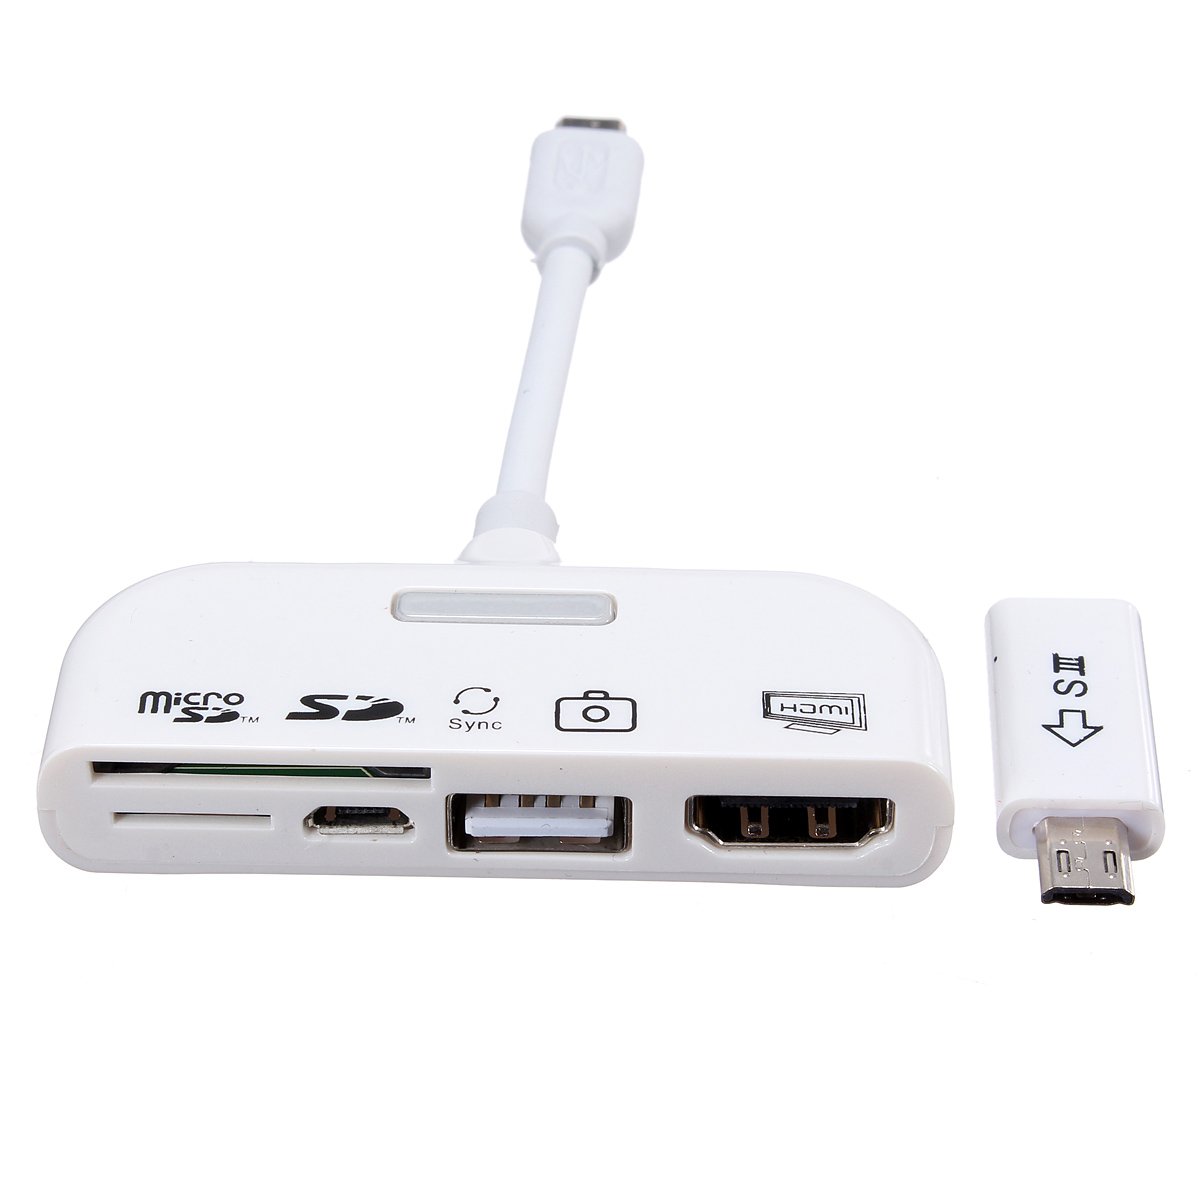 Find M.WAY 5 in 1 MHL to HDMI-Compatible Adapter Card Reader SD Micro-USB OTG Kit Connector for Samsung S6 S5 Note 2 Note 3 THT-020 for Sale on Gipsybee.com with cryptocurrencies